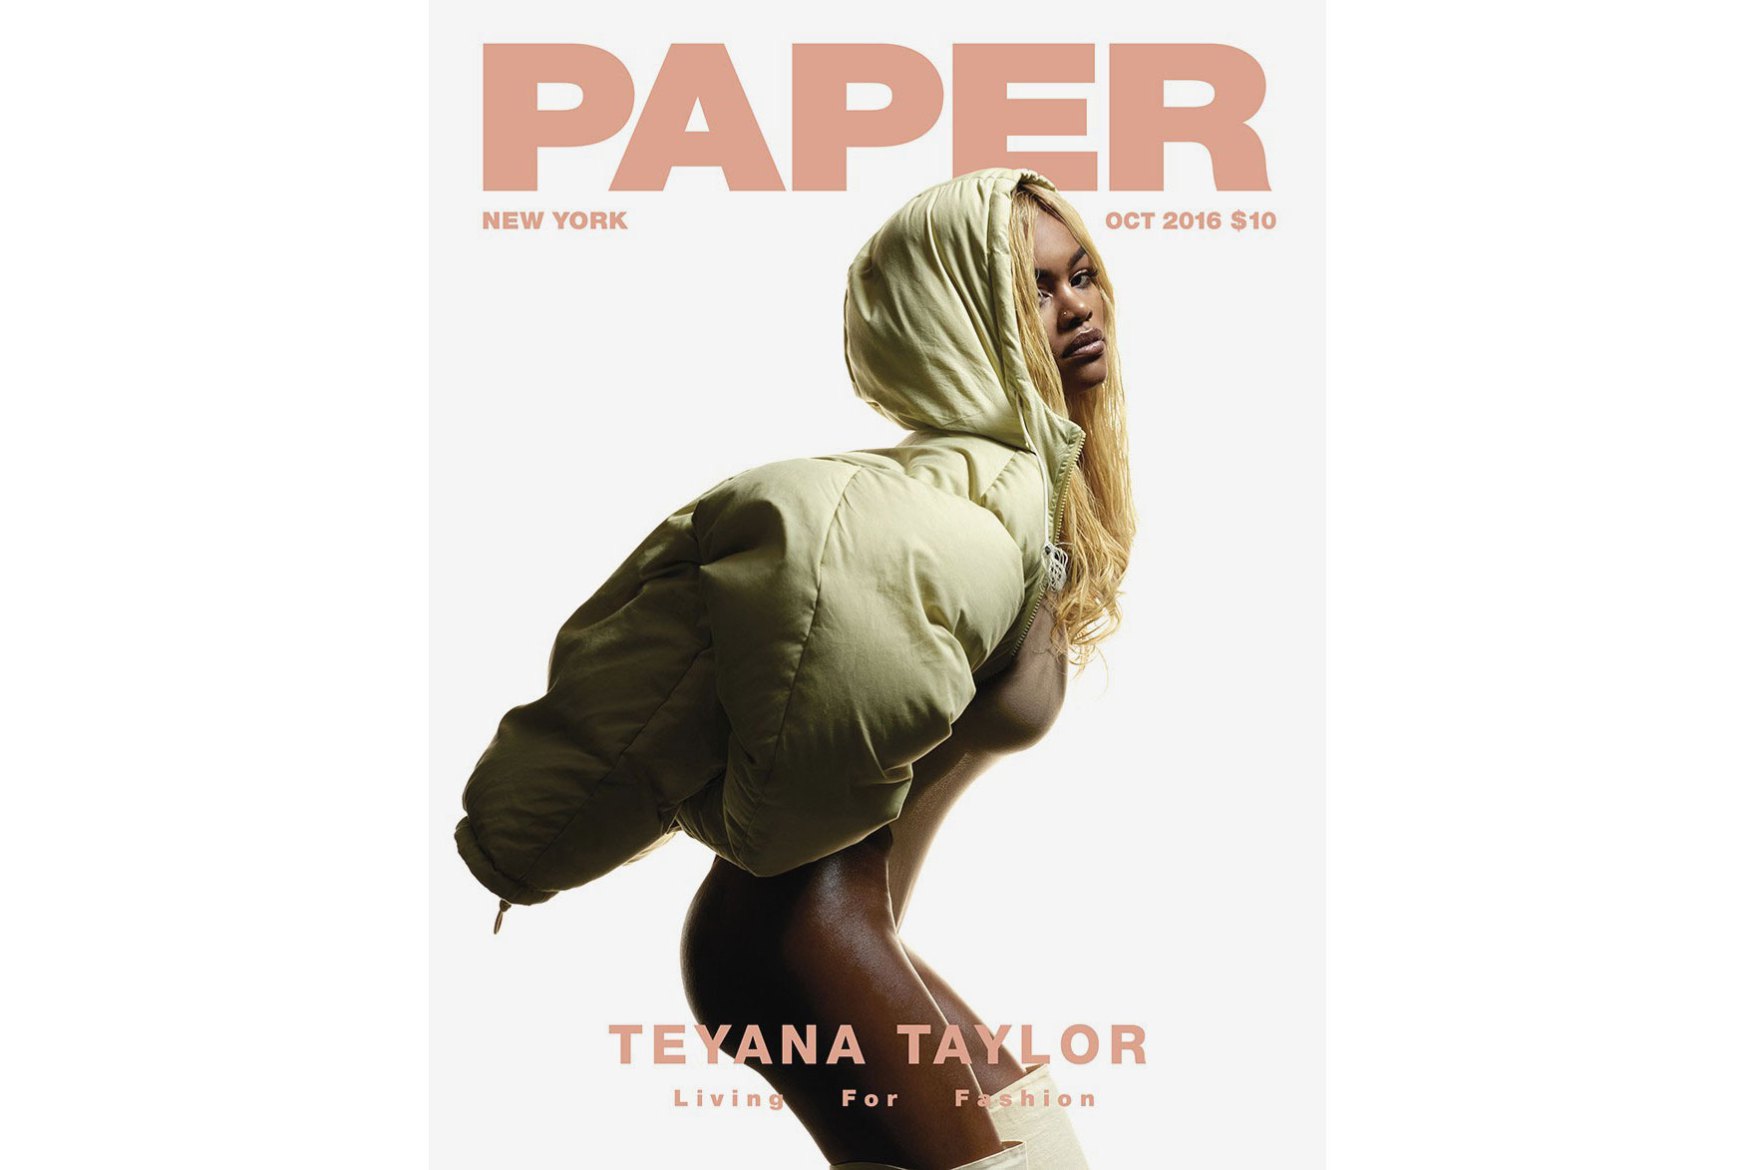 Teyana Taylor Cover PAPER magazine - TRENDS periodical